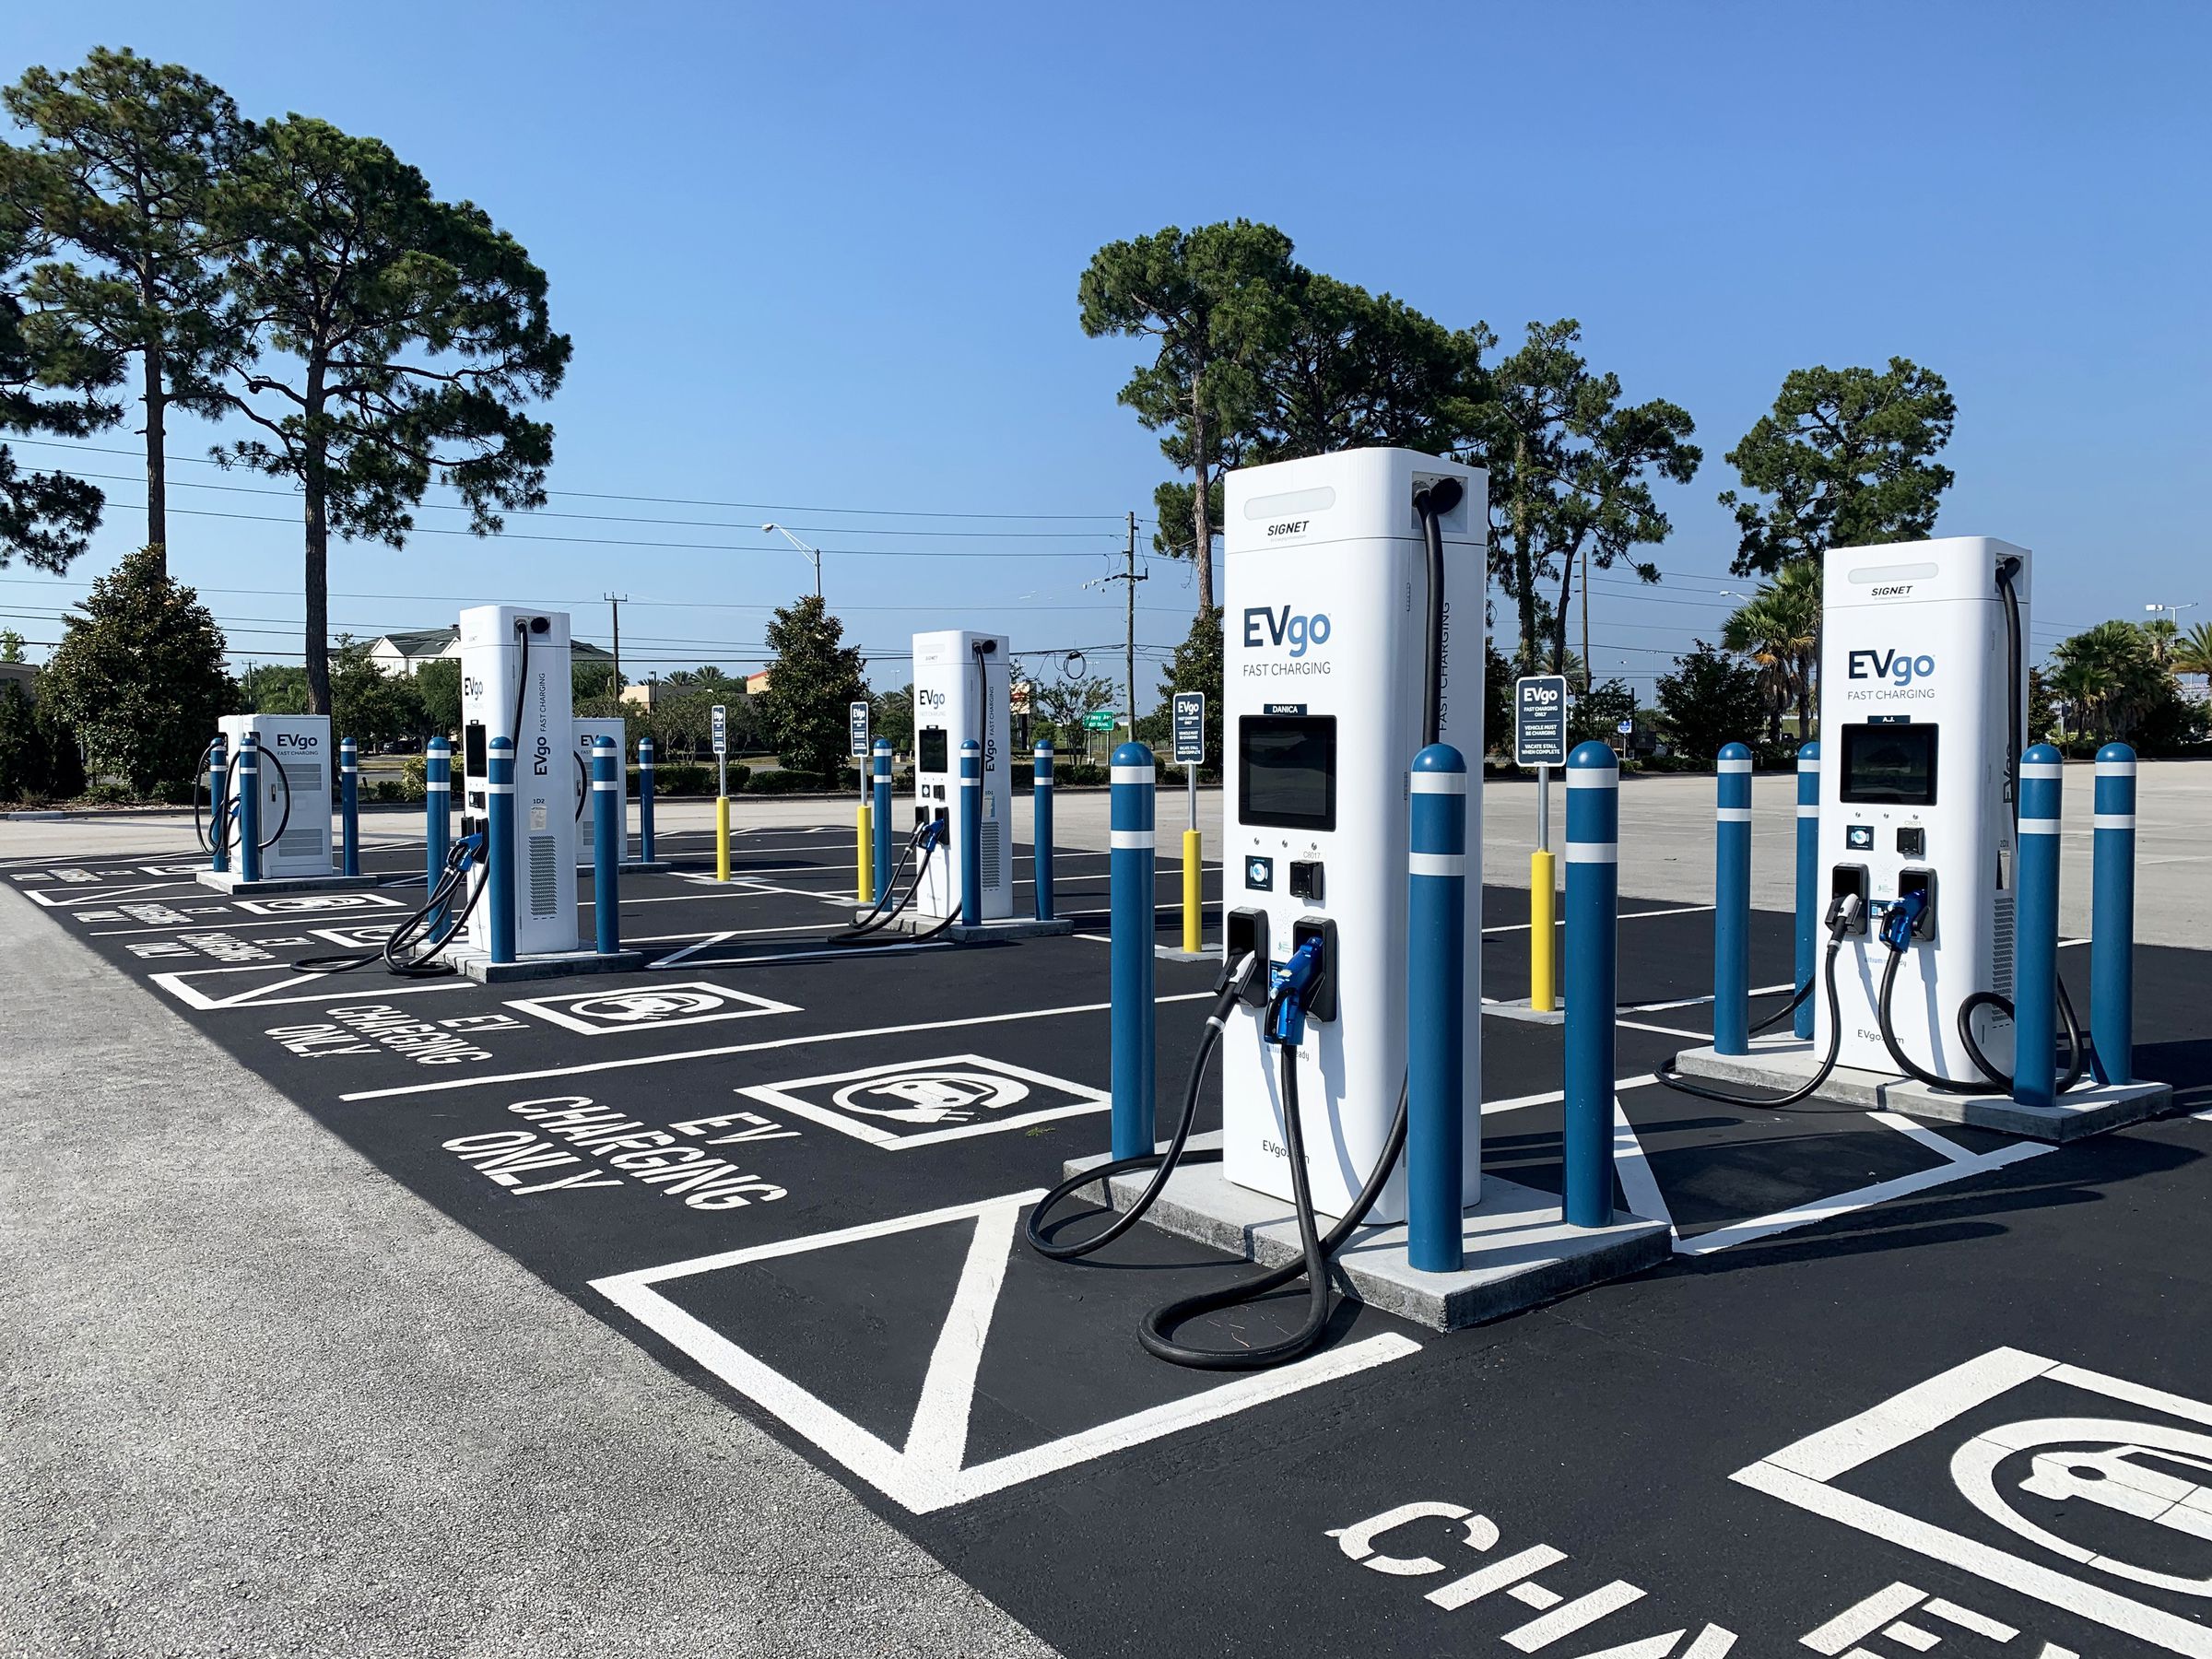 Newer models of EVgo charging stations — some still include CHAdeMO compatibility for the Nissan Leaf.